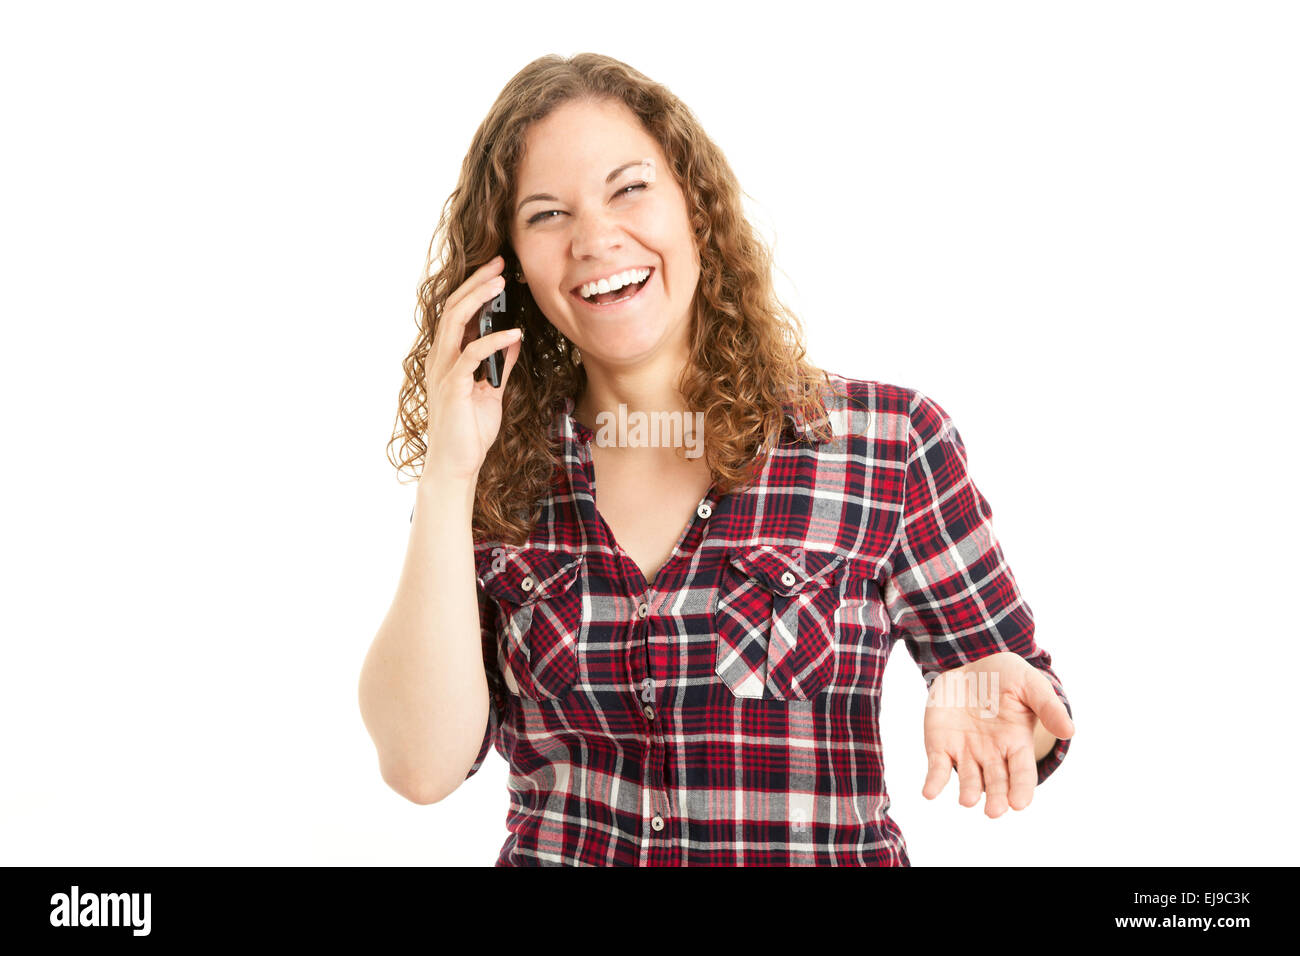 Young girl on the phone Stock Photo